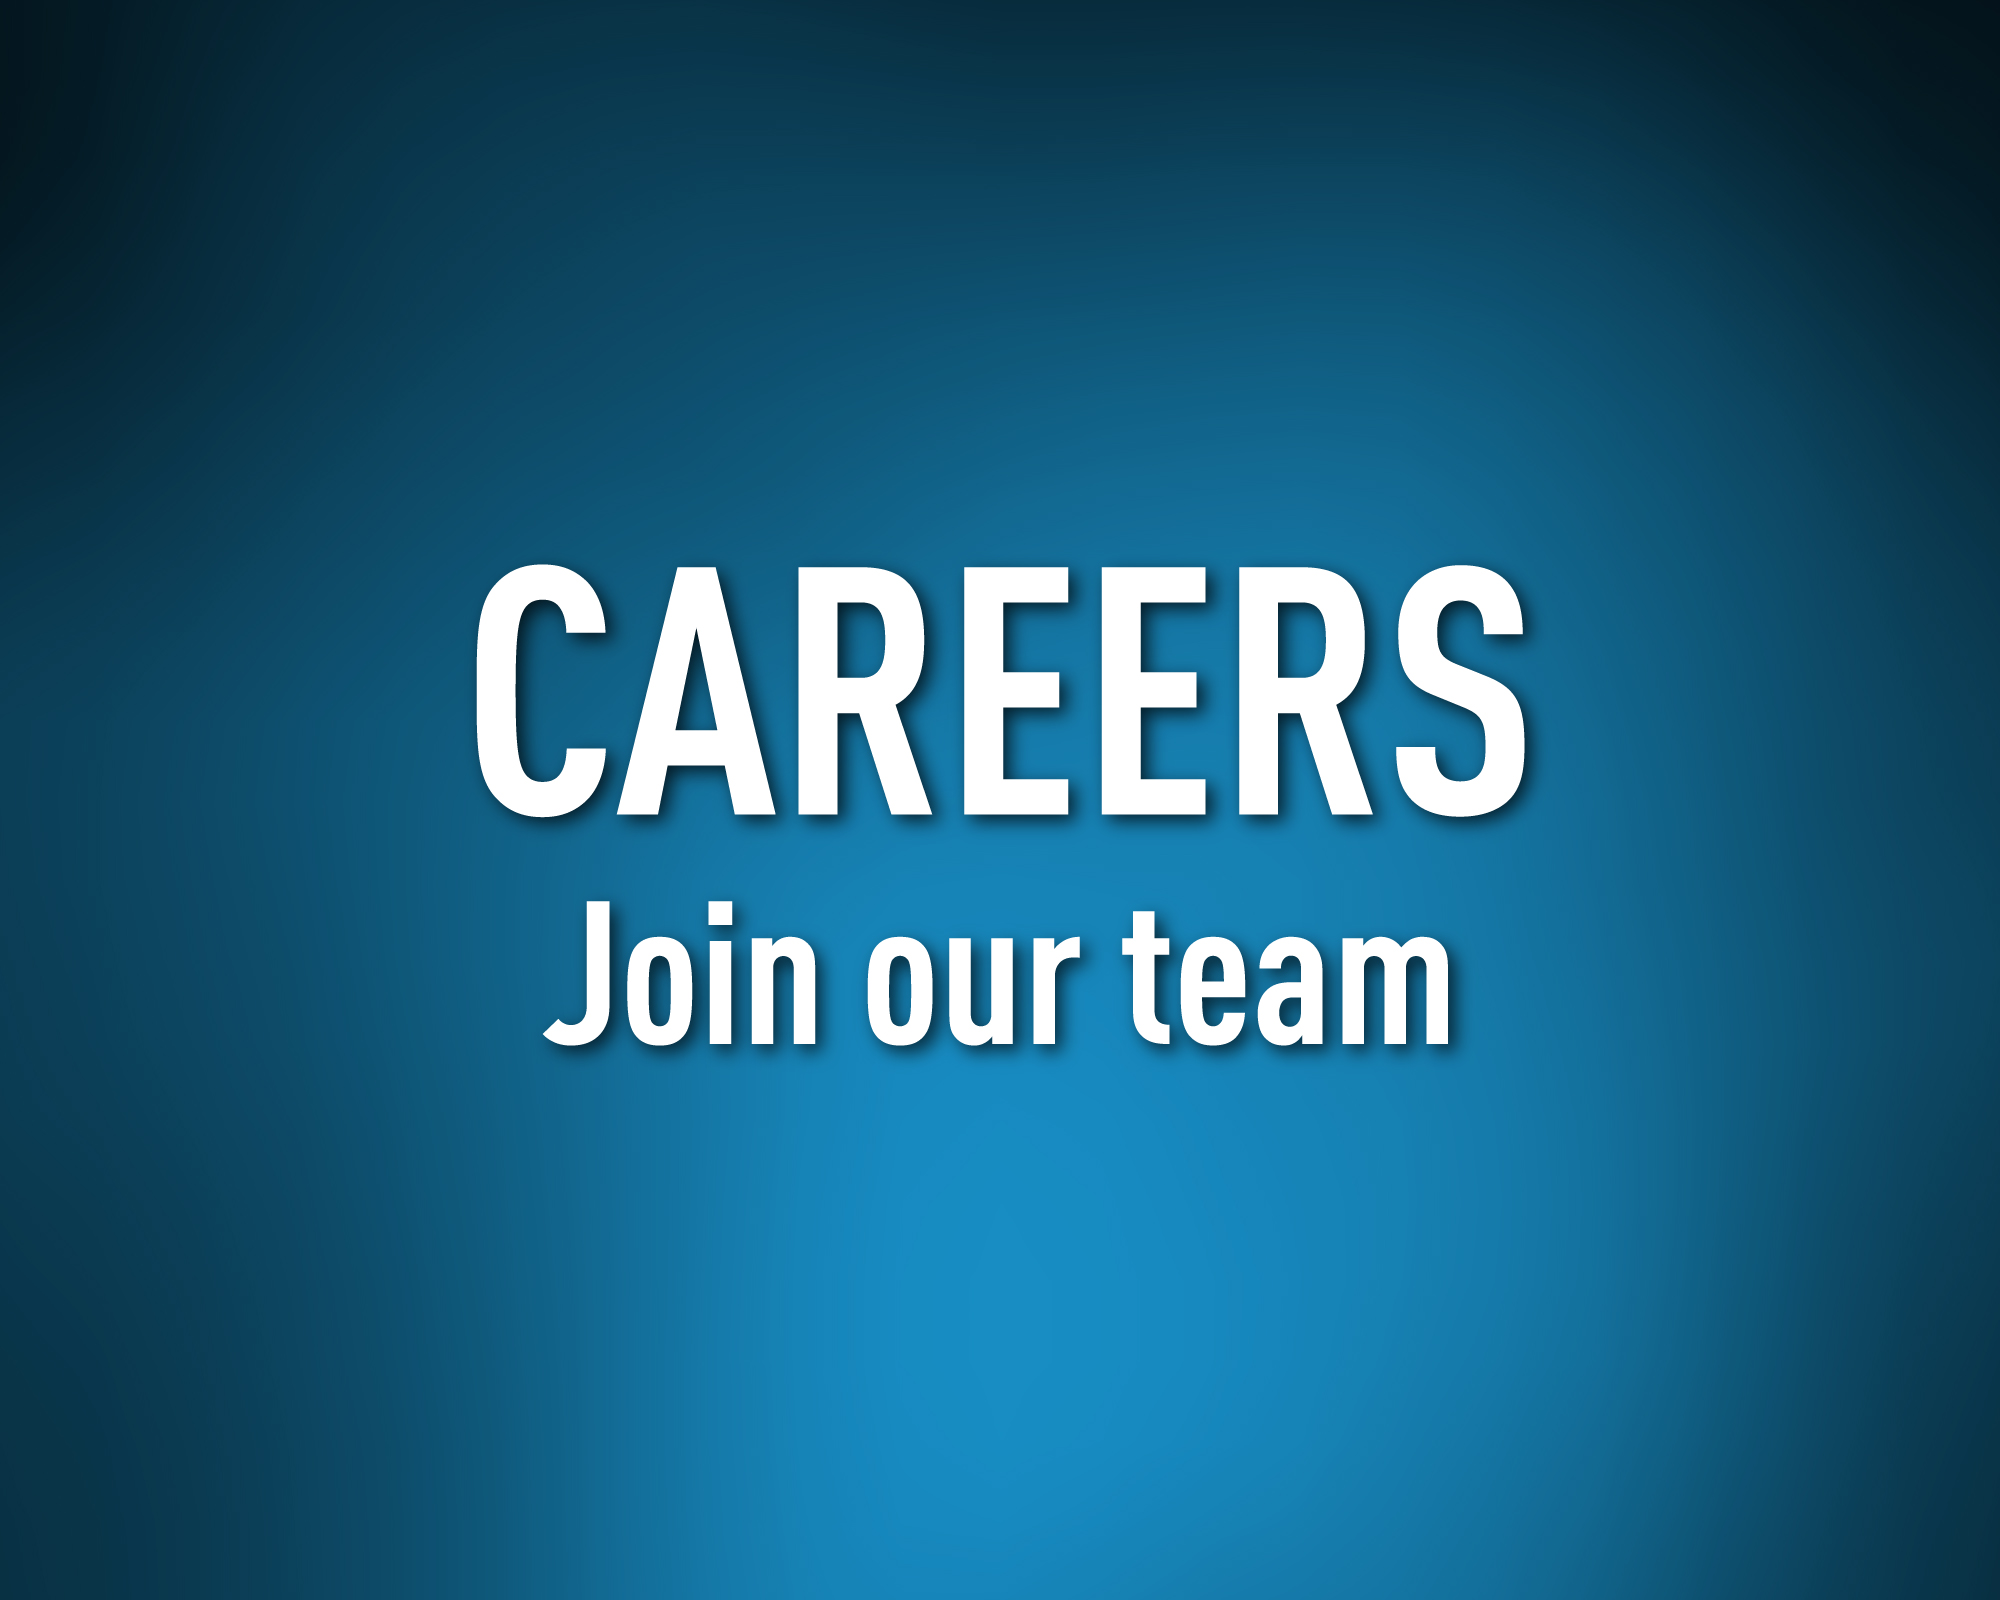 Careers. Join our team